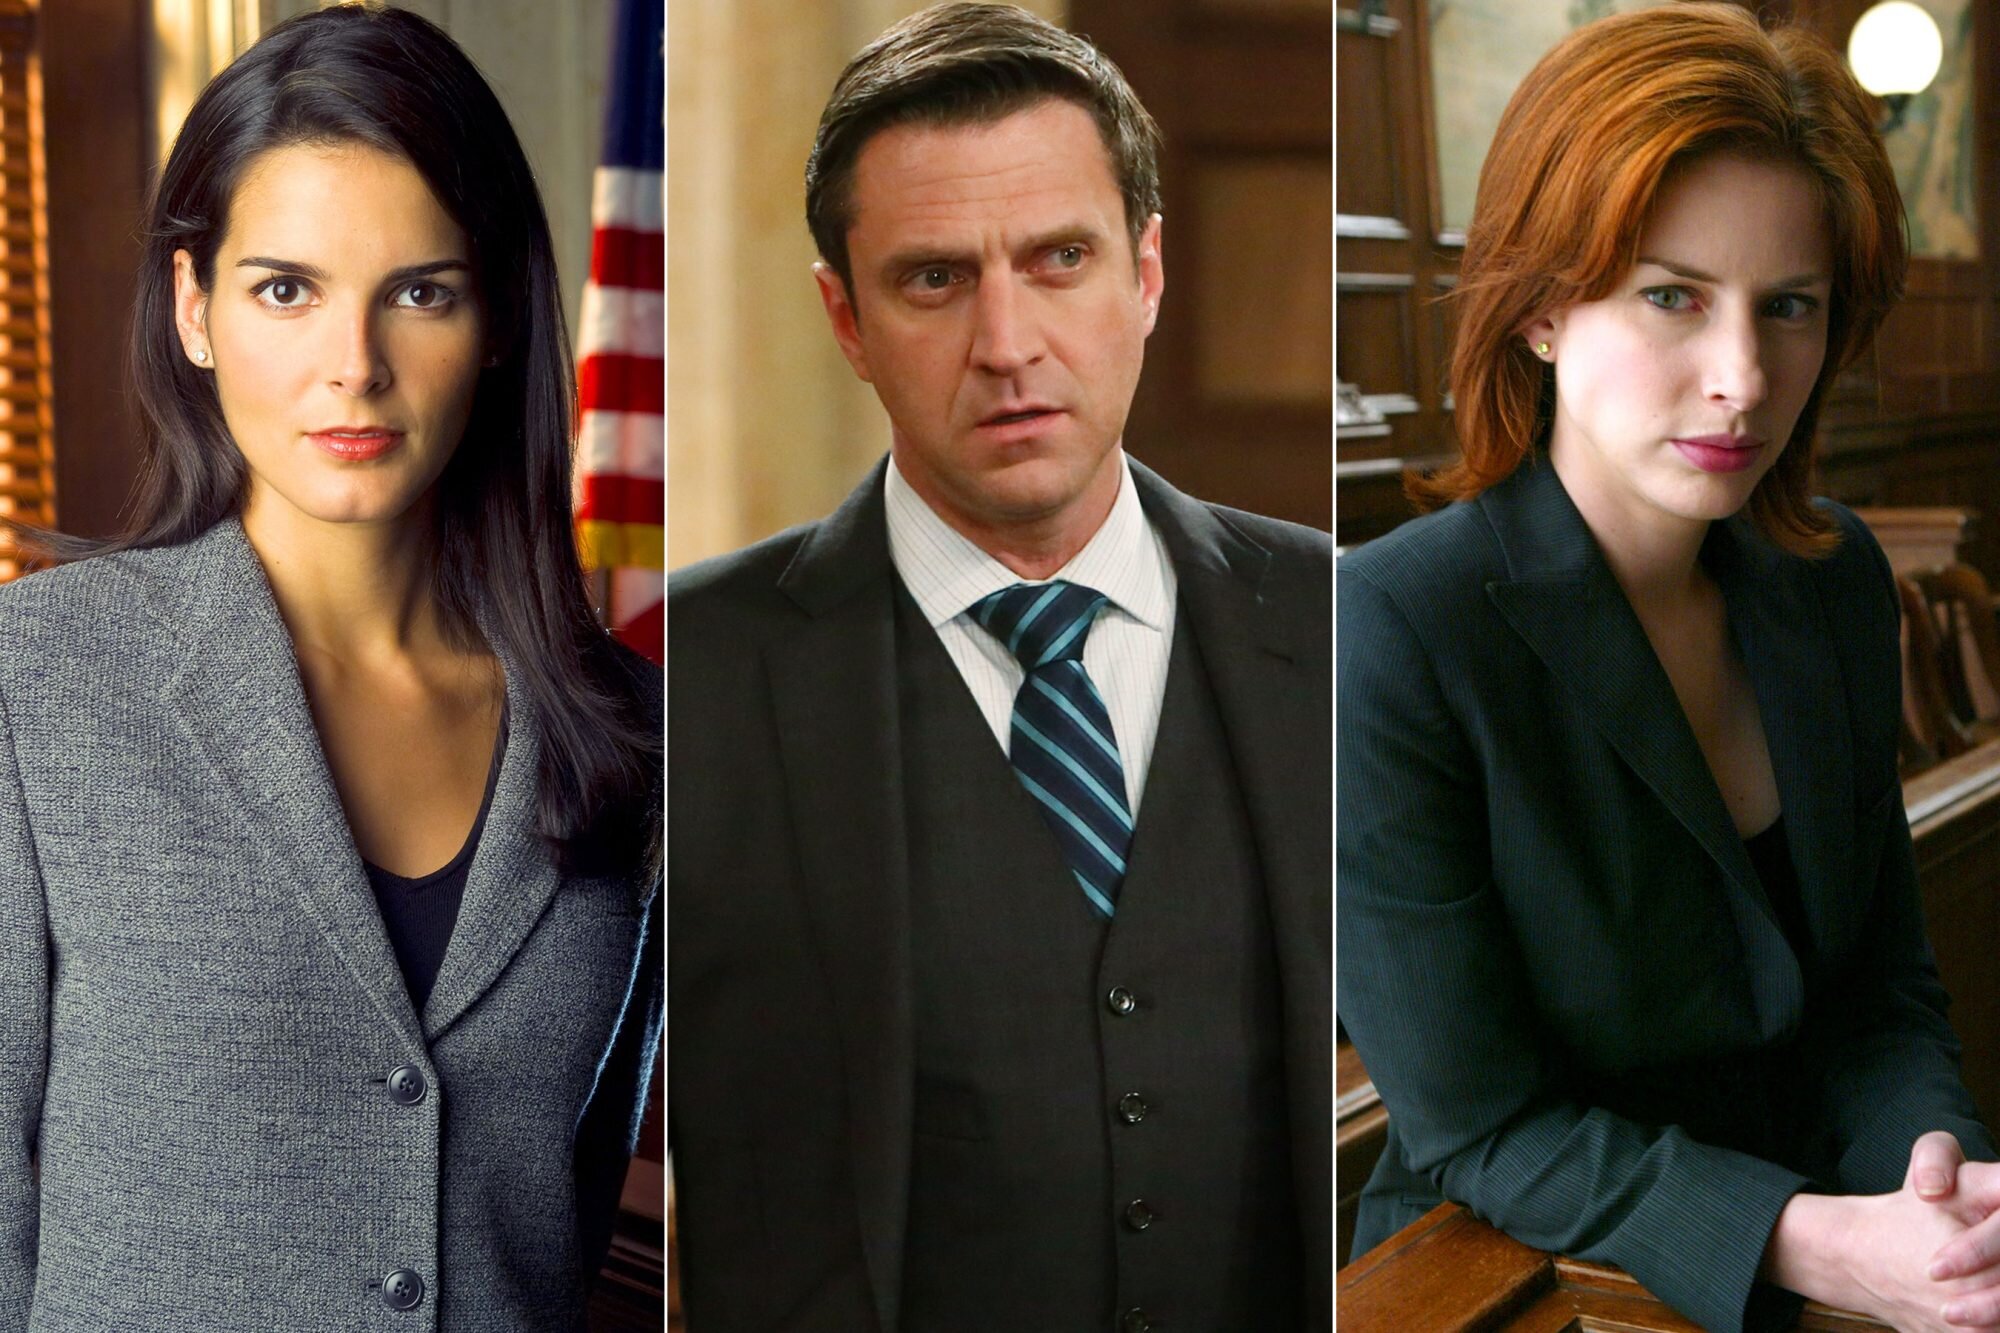 Law And Order Season 23 Two Key Cast Members Leave!